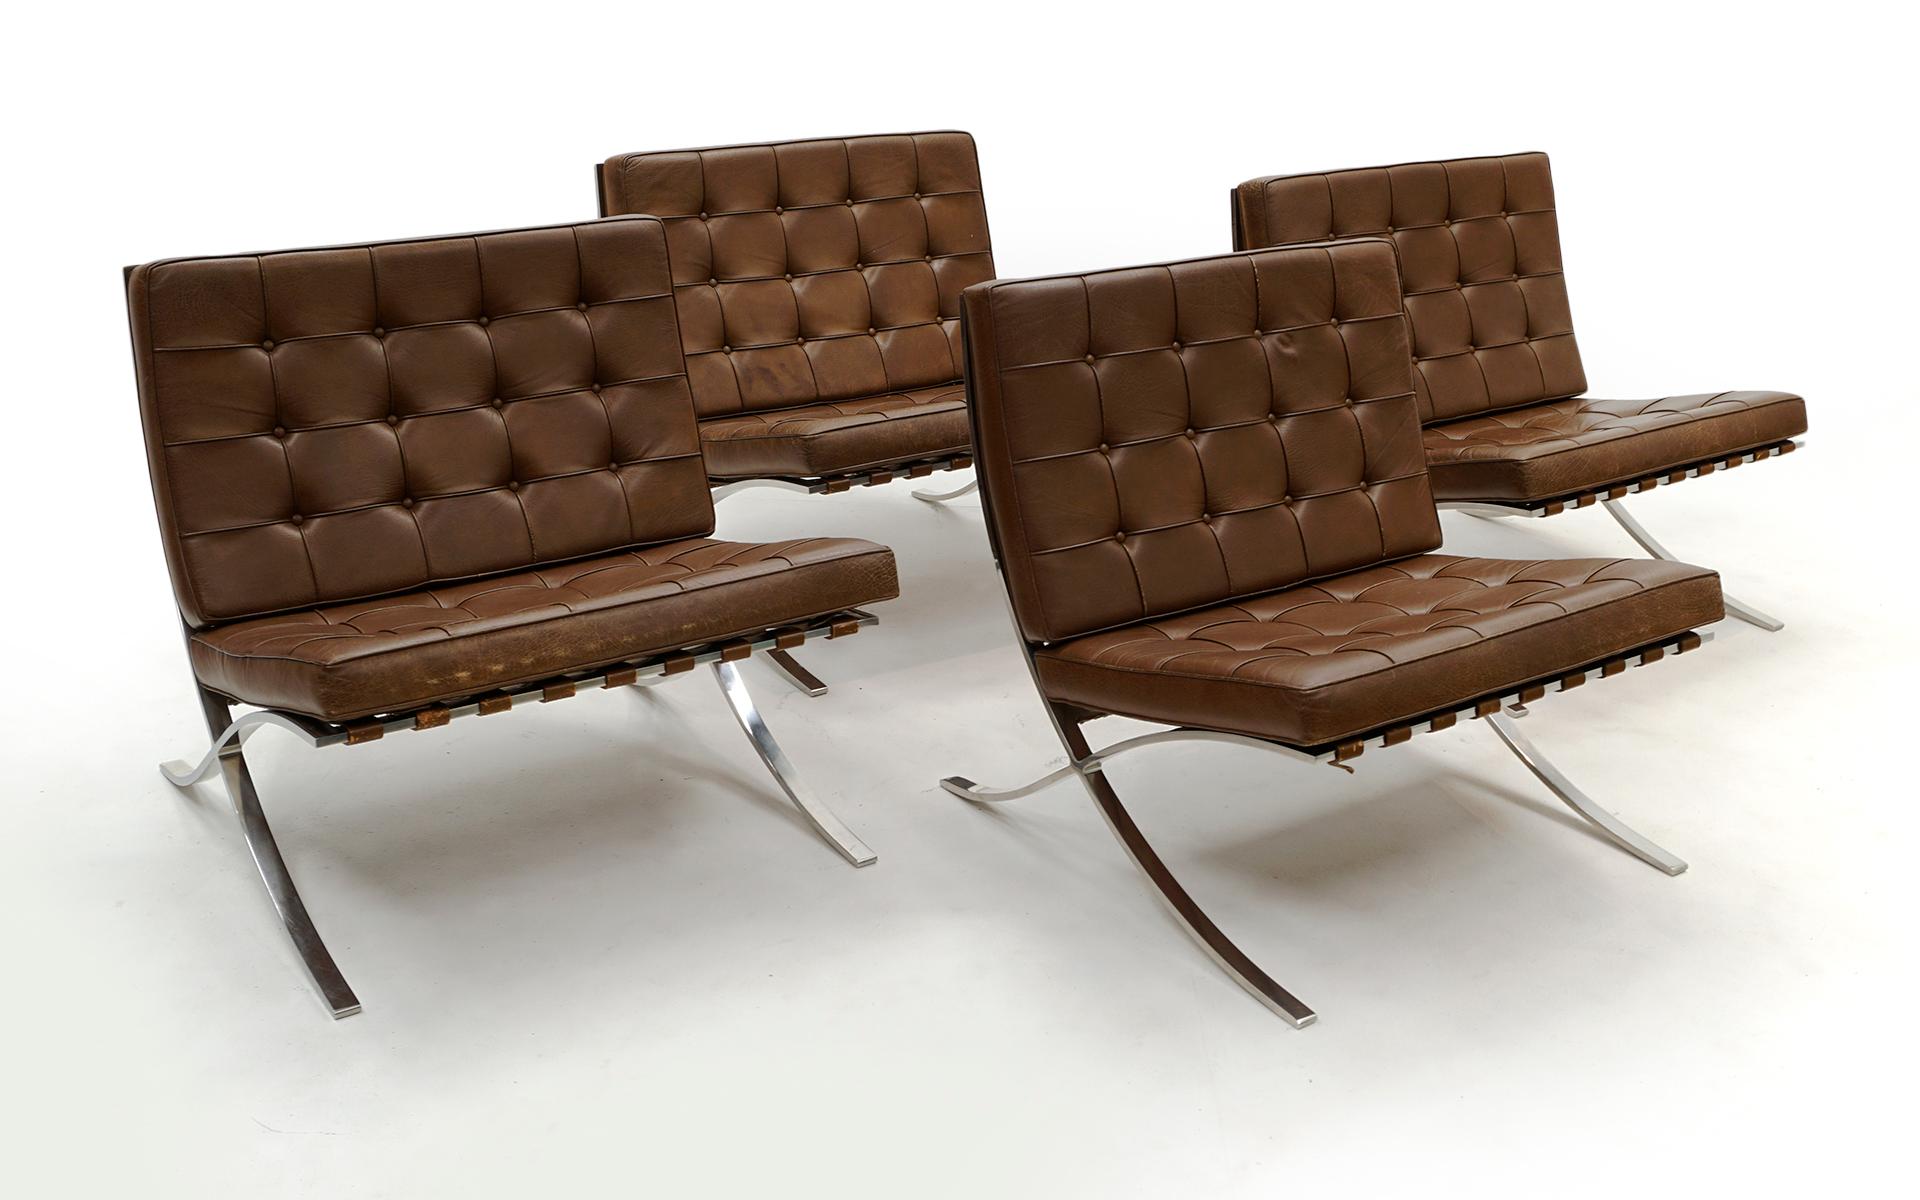 Four Early original 1960s production Barcelona chairs designed by Ludwig Mies van der Rohe for Knoll. Brown leather with solid stainless steel frames. Not the chromed steel version, but the much more desirable stainless steel version. These are the